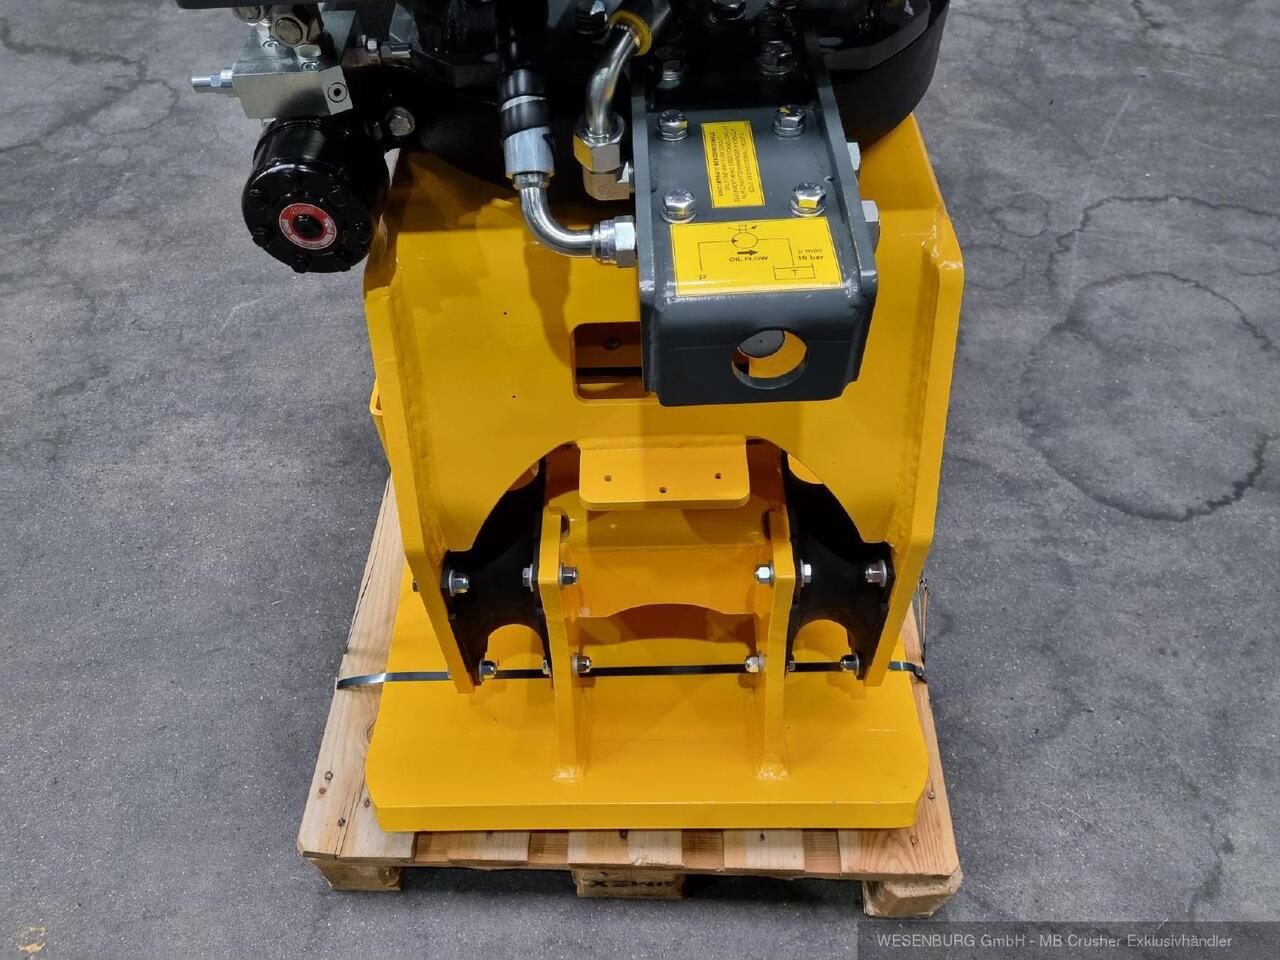 New Attachment, Plate compactor for Excavator Simex Anbauverdichter PV700 inkl. Drehwerk Anbauklasse 12 - 25 t: picture 5